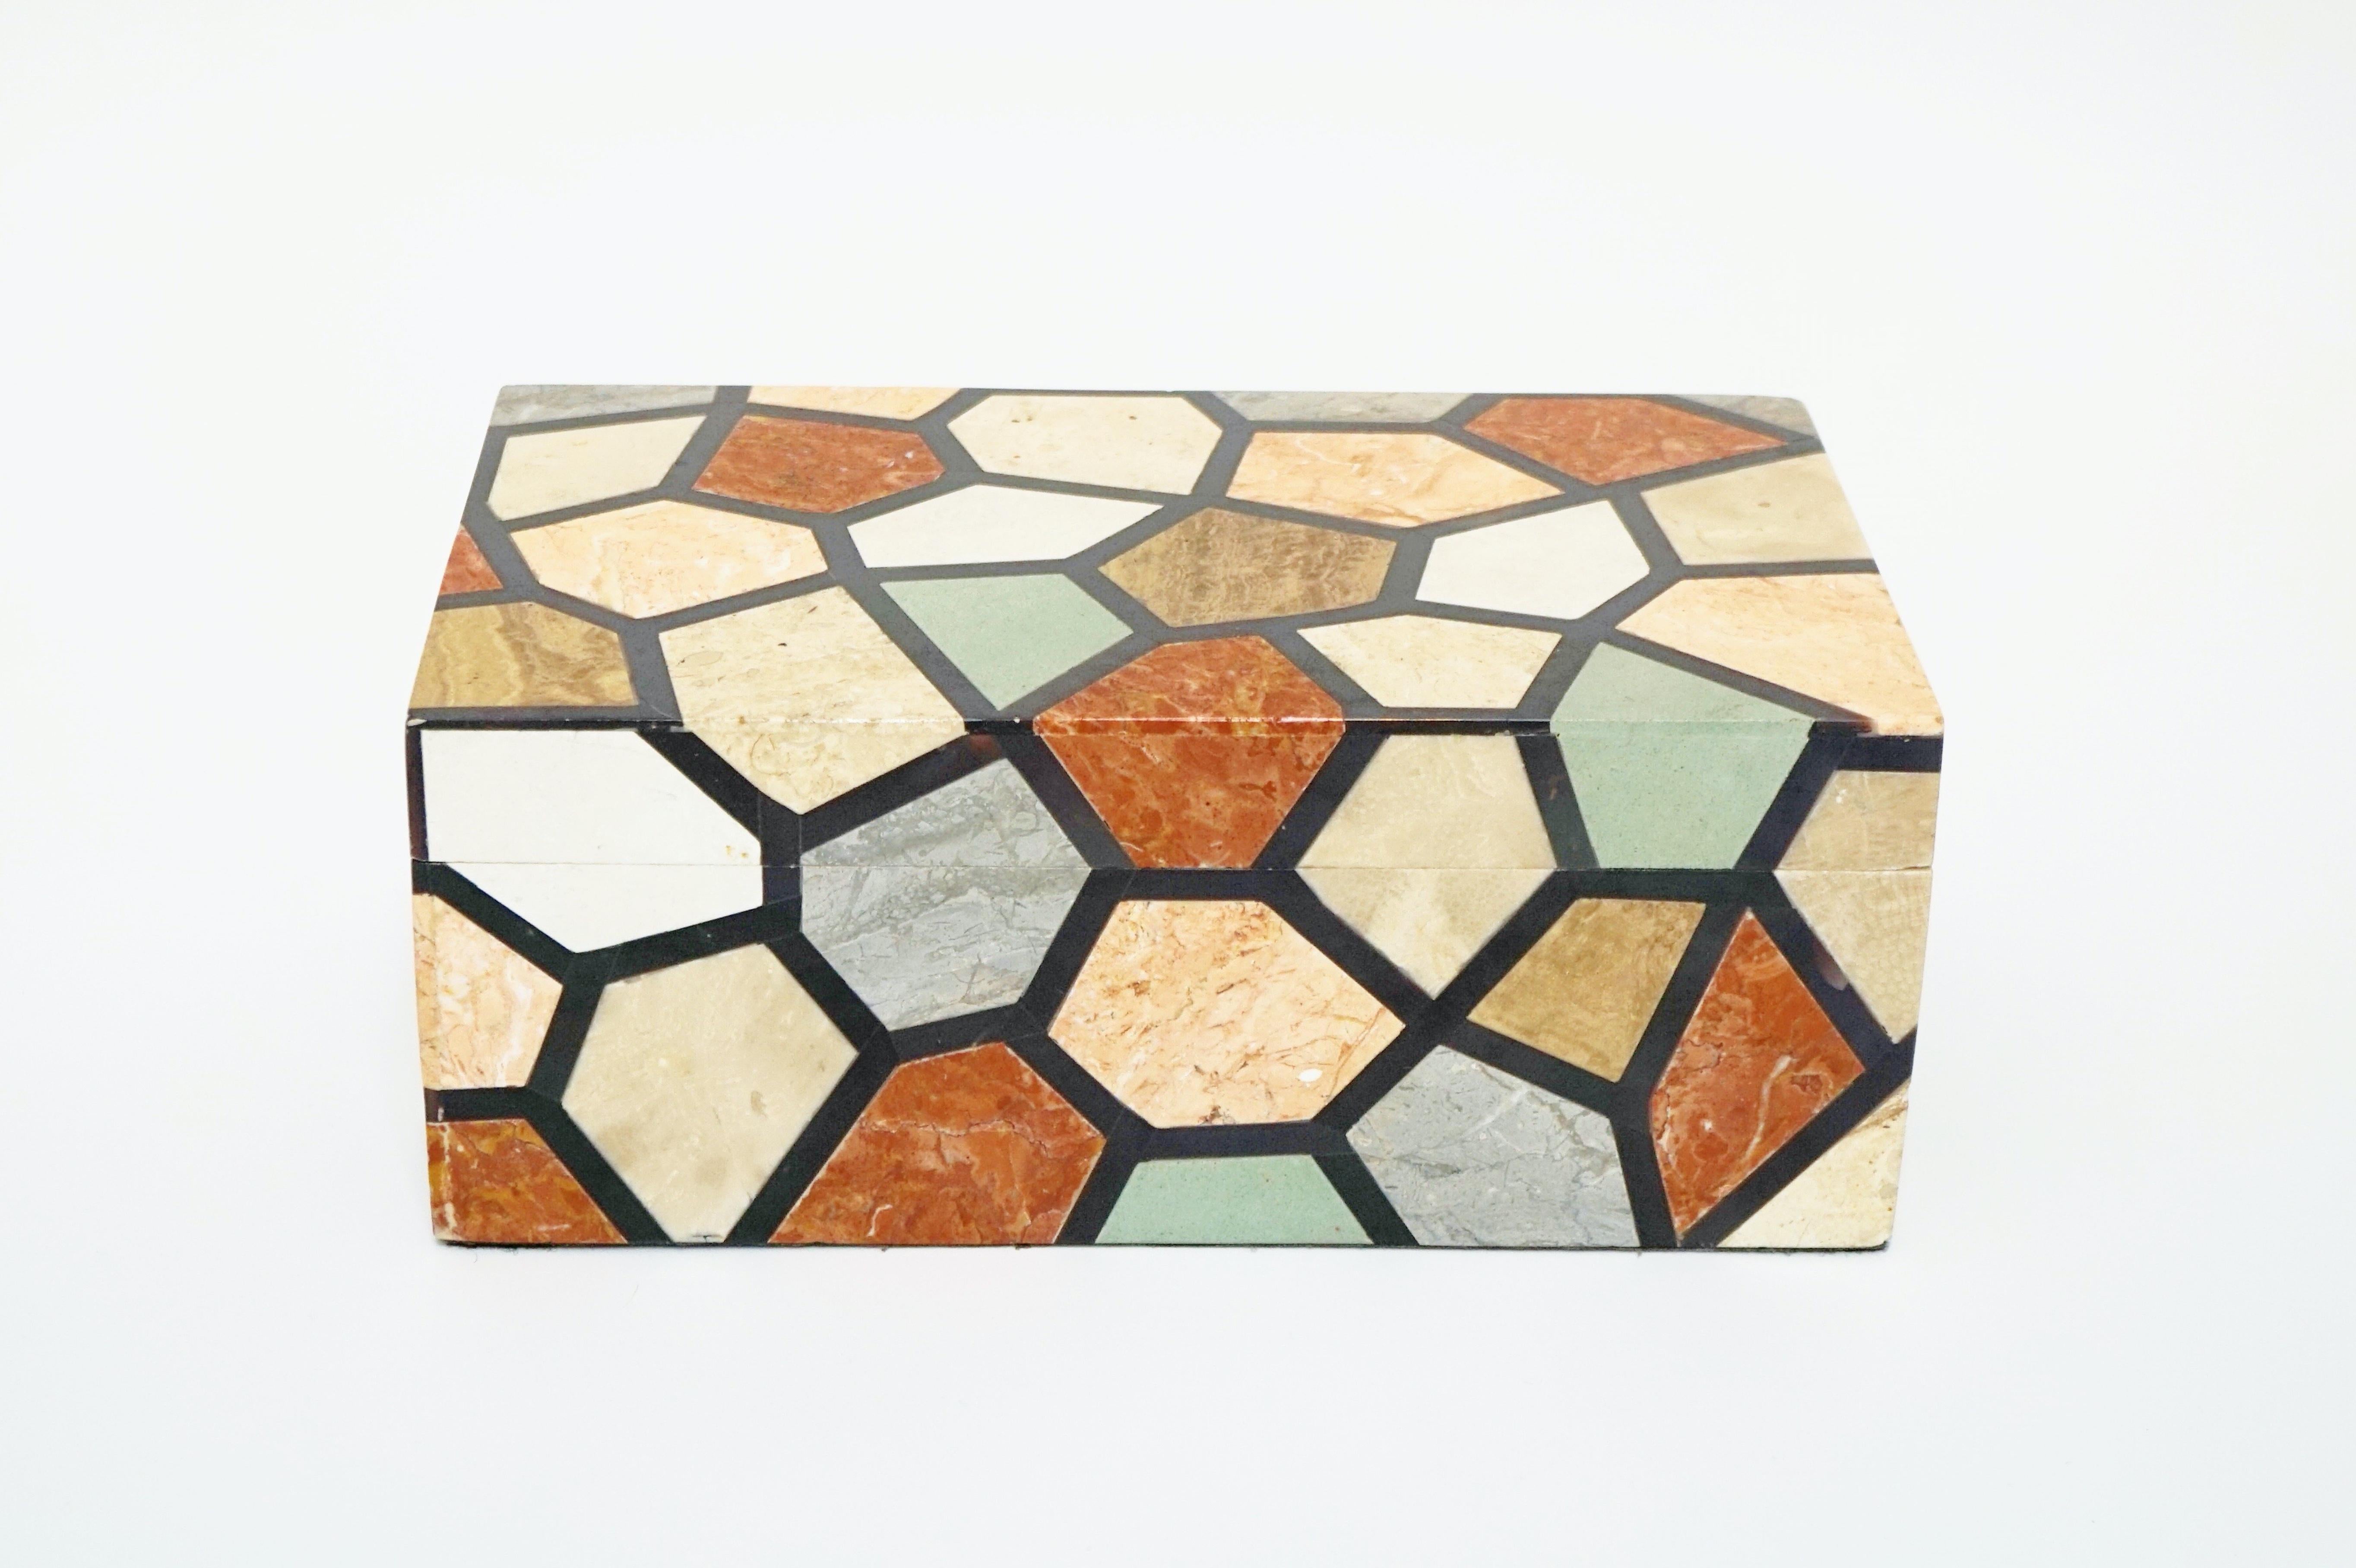 This beautiful vintage tessellated stone lidded box by Maitland Smith is the perfect way to organize your jewelry or tidy up your coffee table in a stylish way! 

Details:
- Removable lid
- Wood interior
- 10.2